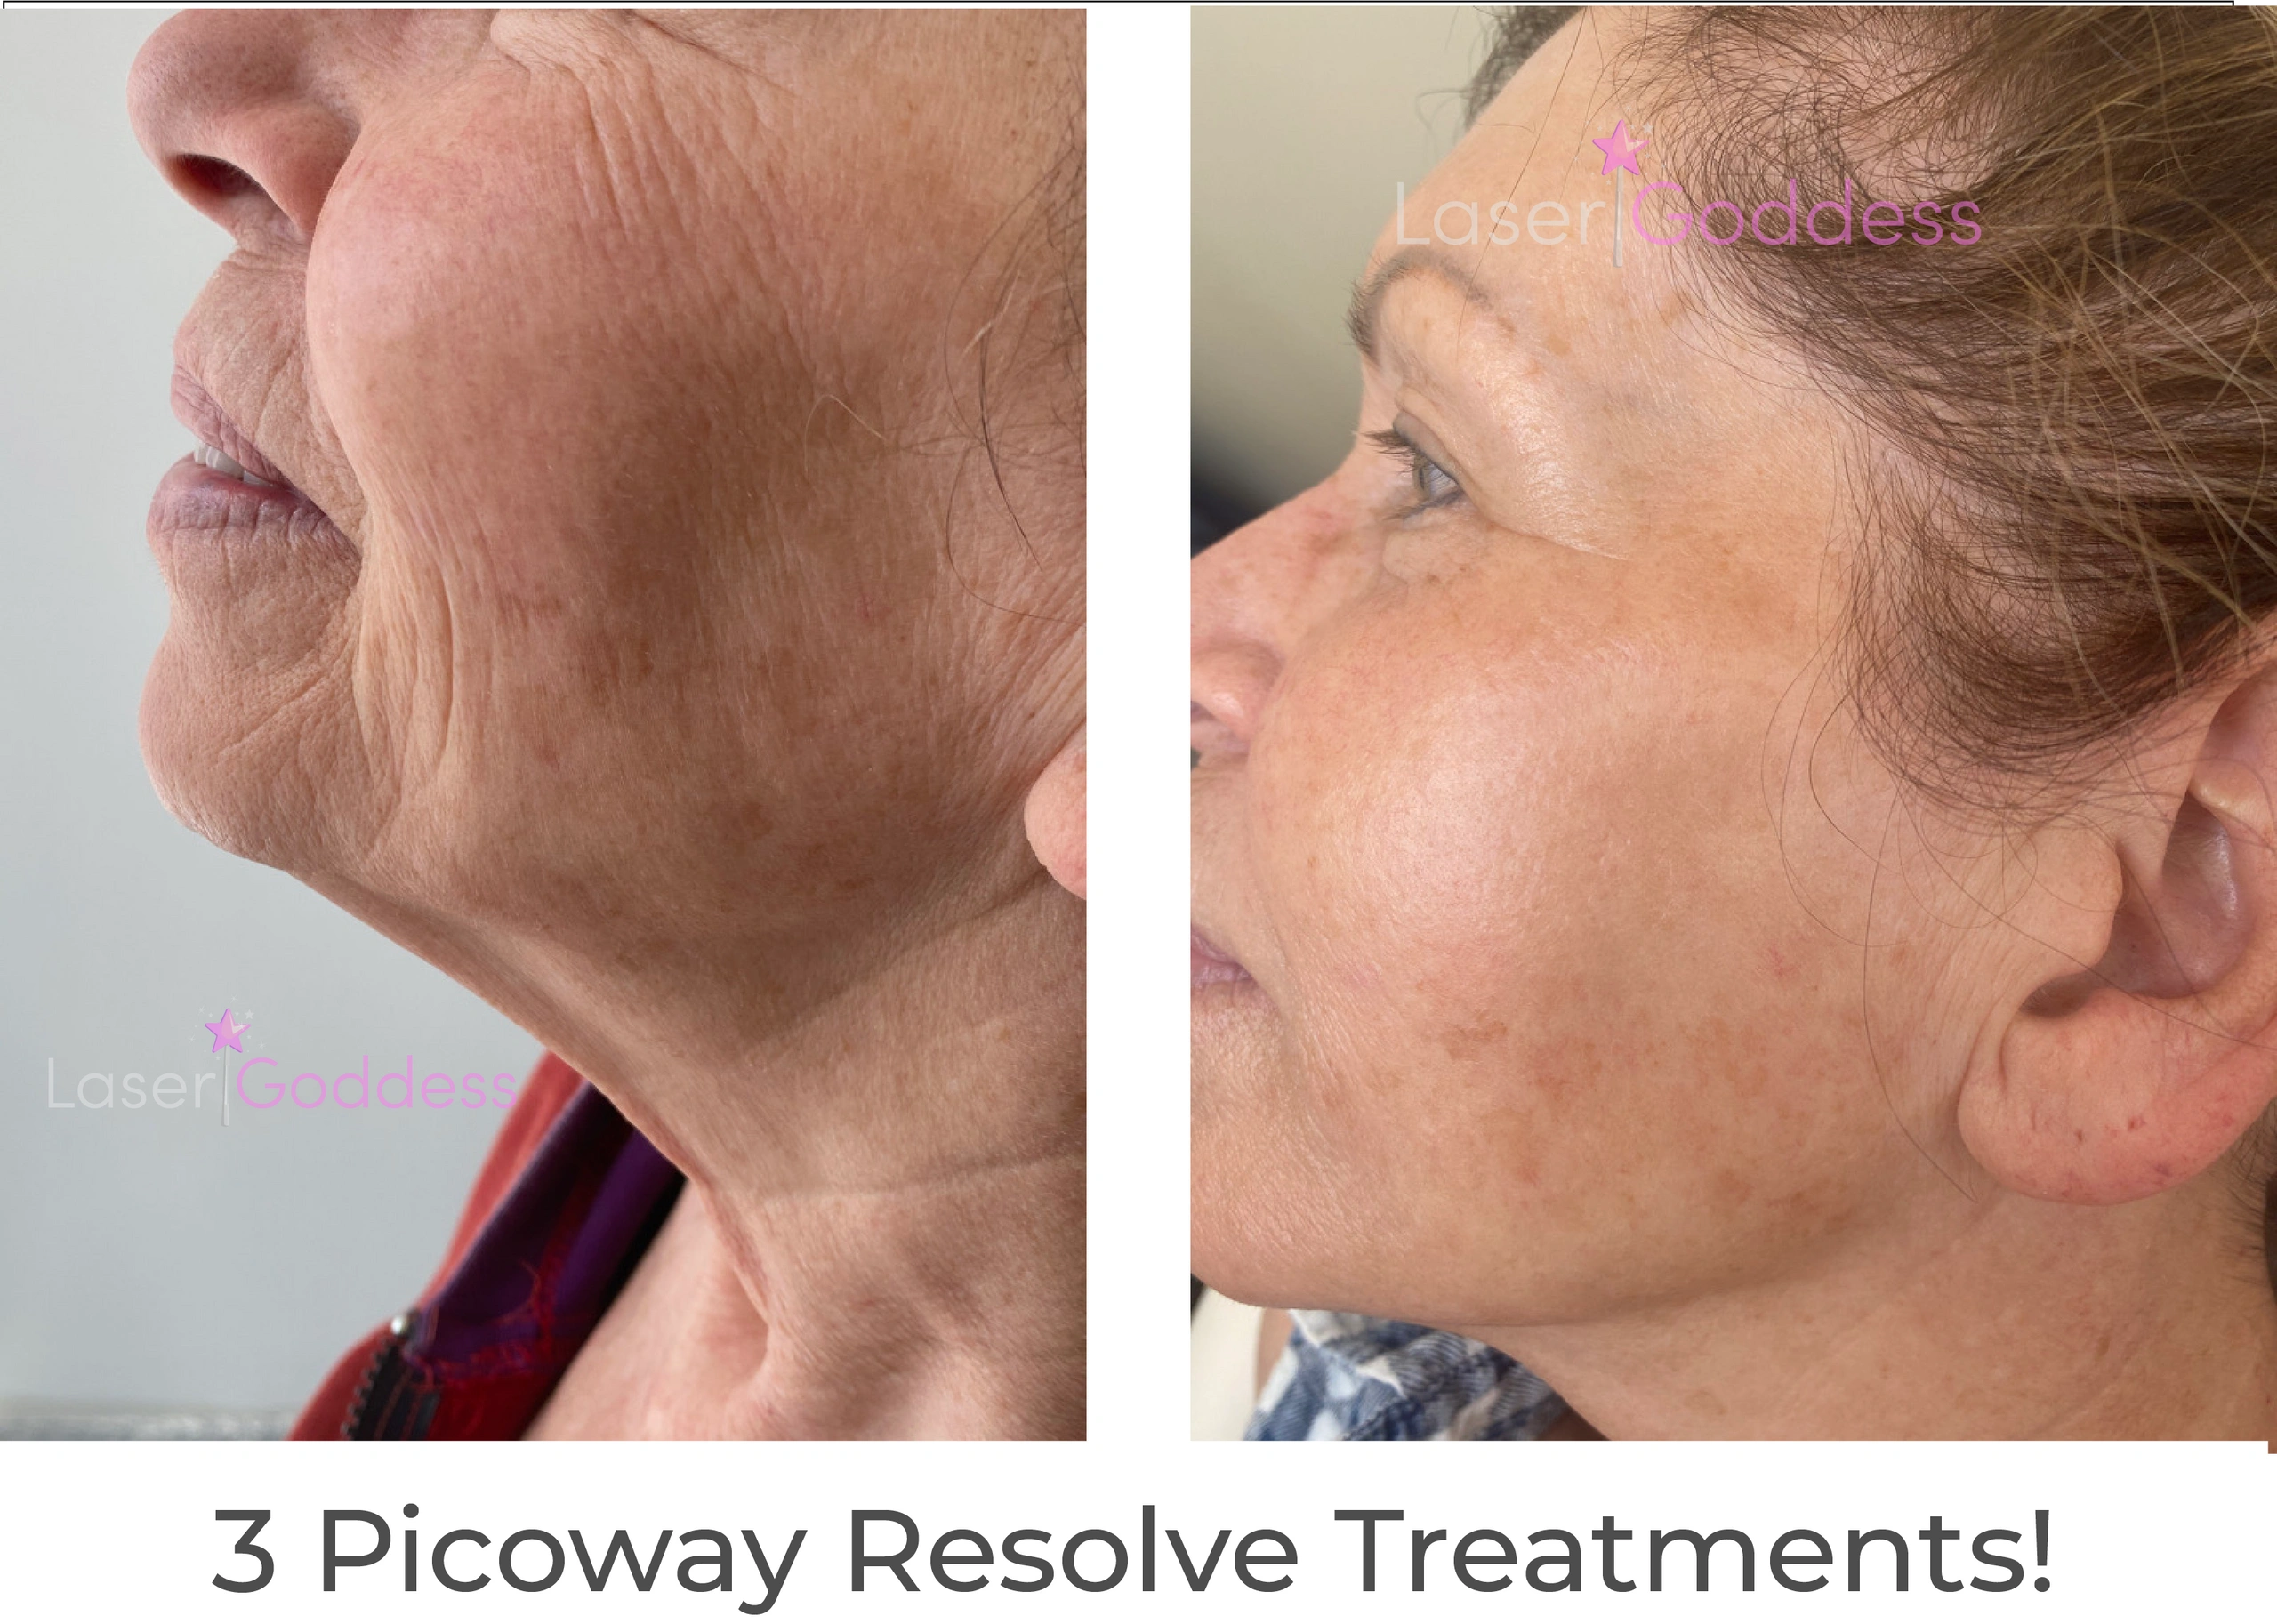 This client had 3 Picoway Resolve treatments over a 6 month period